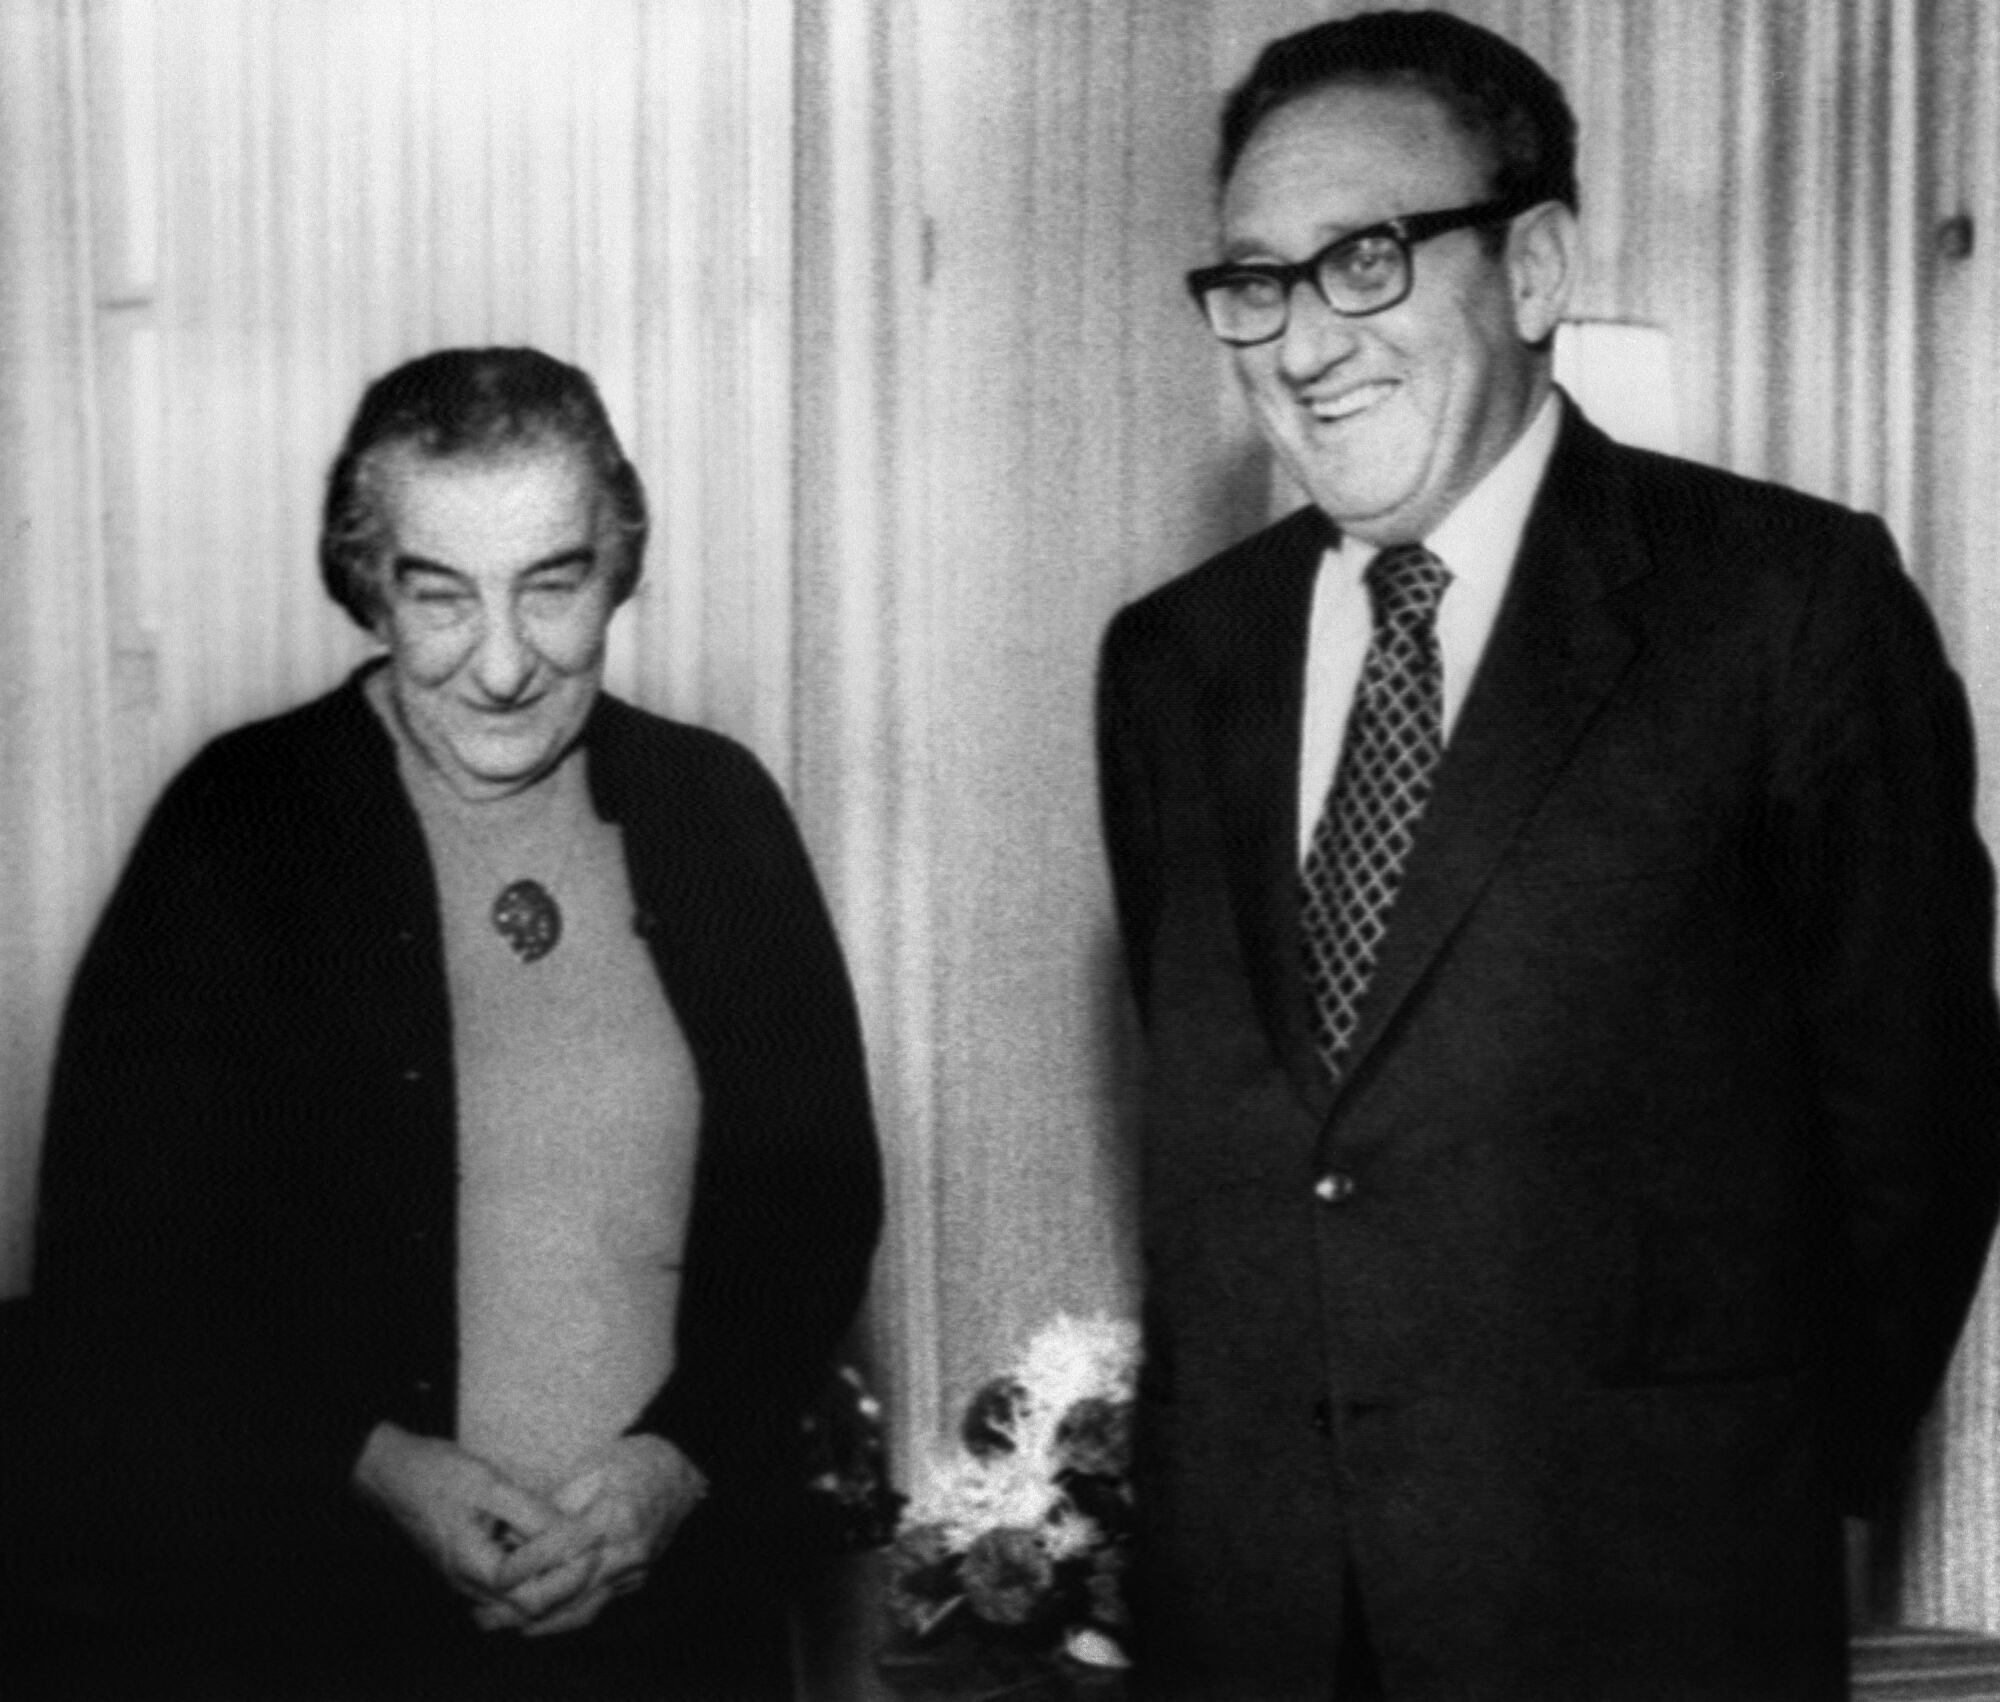 US Secretary of State Henry Kissinger was at the center of the negotiations, both to agree to send aid to Israel and to achieve a ceasefire in the conflict.